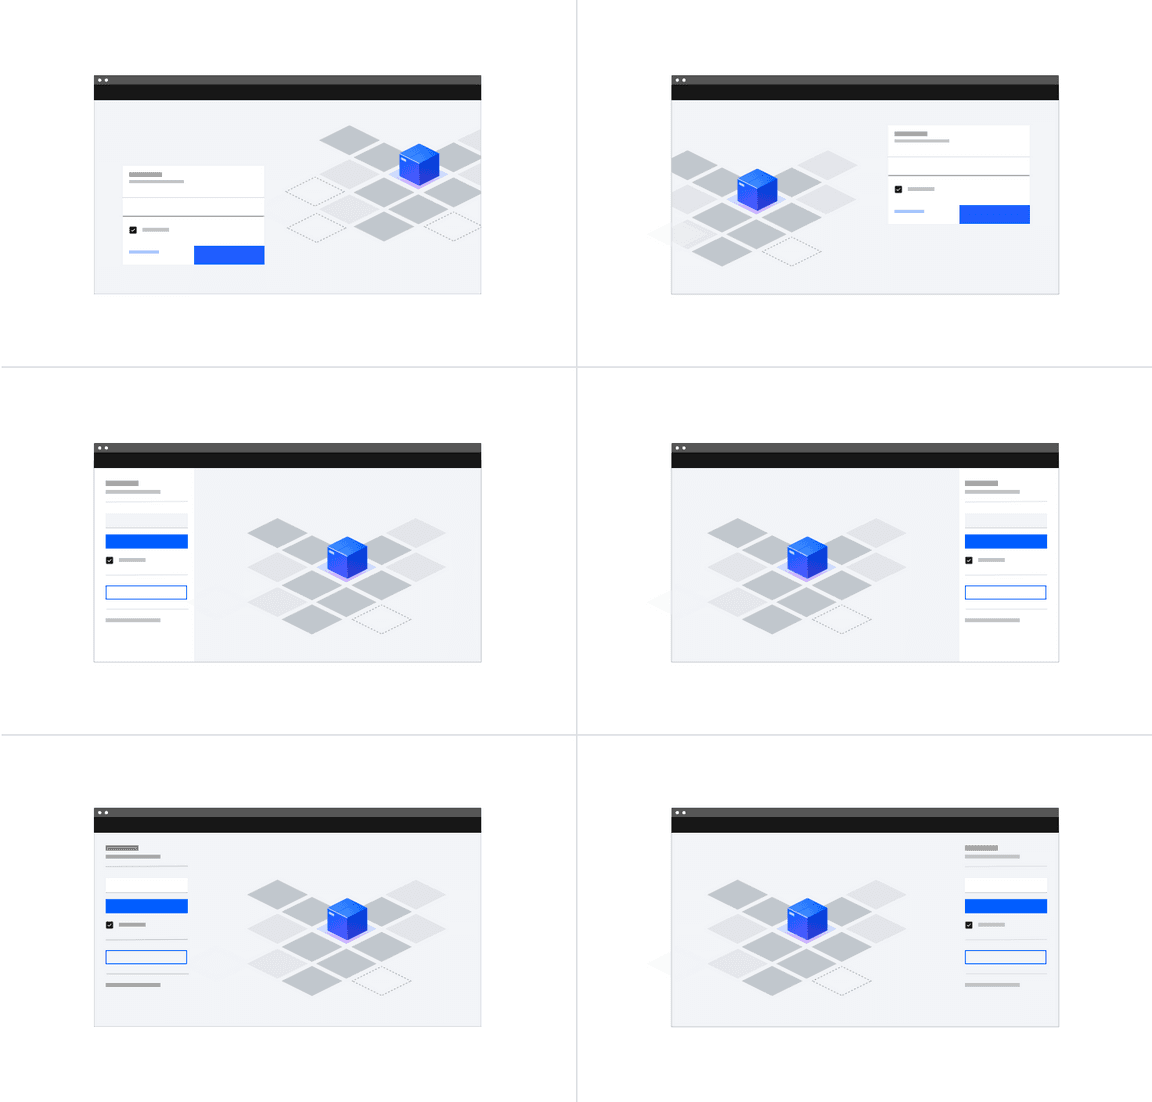 Example of split-screen login forms paired with an illustration